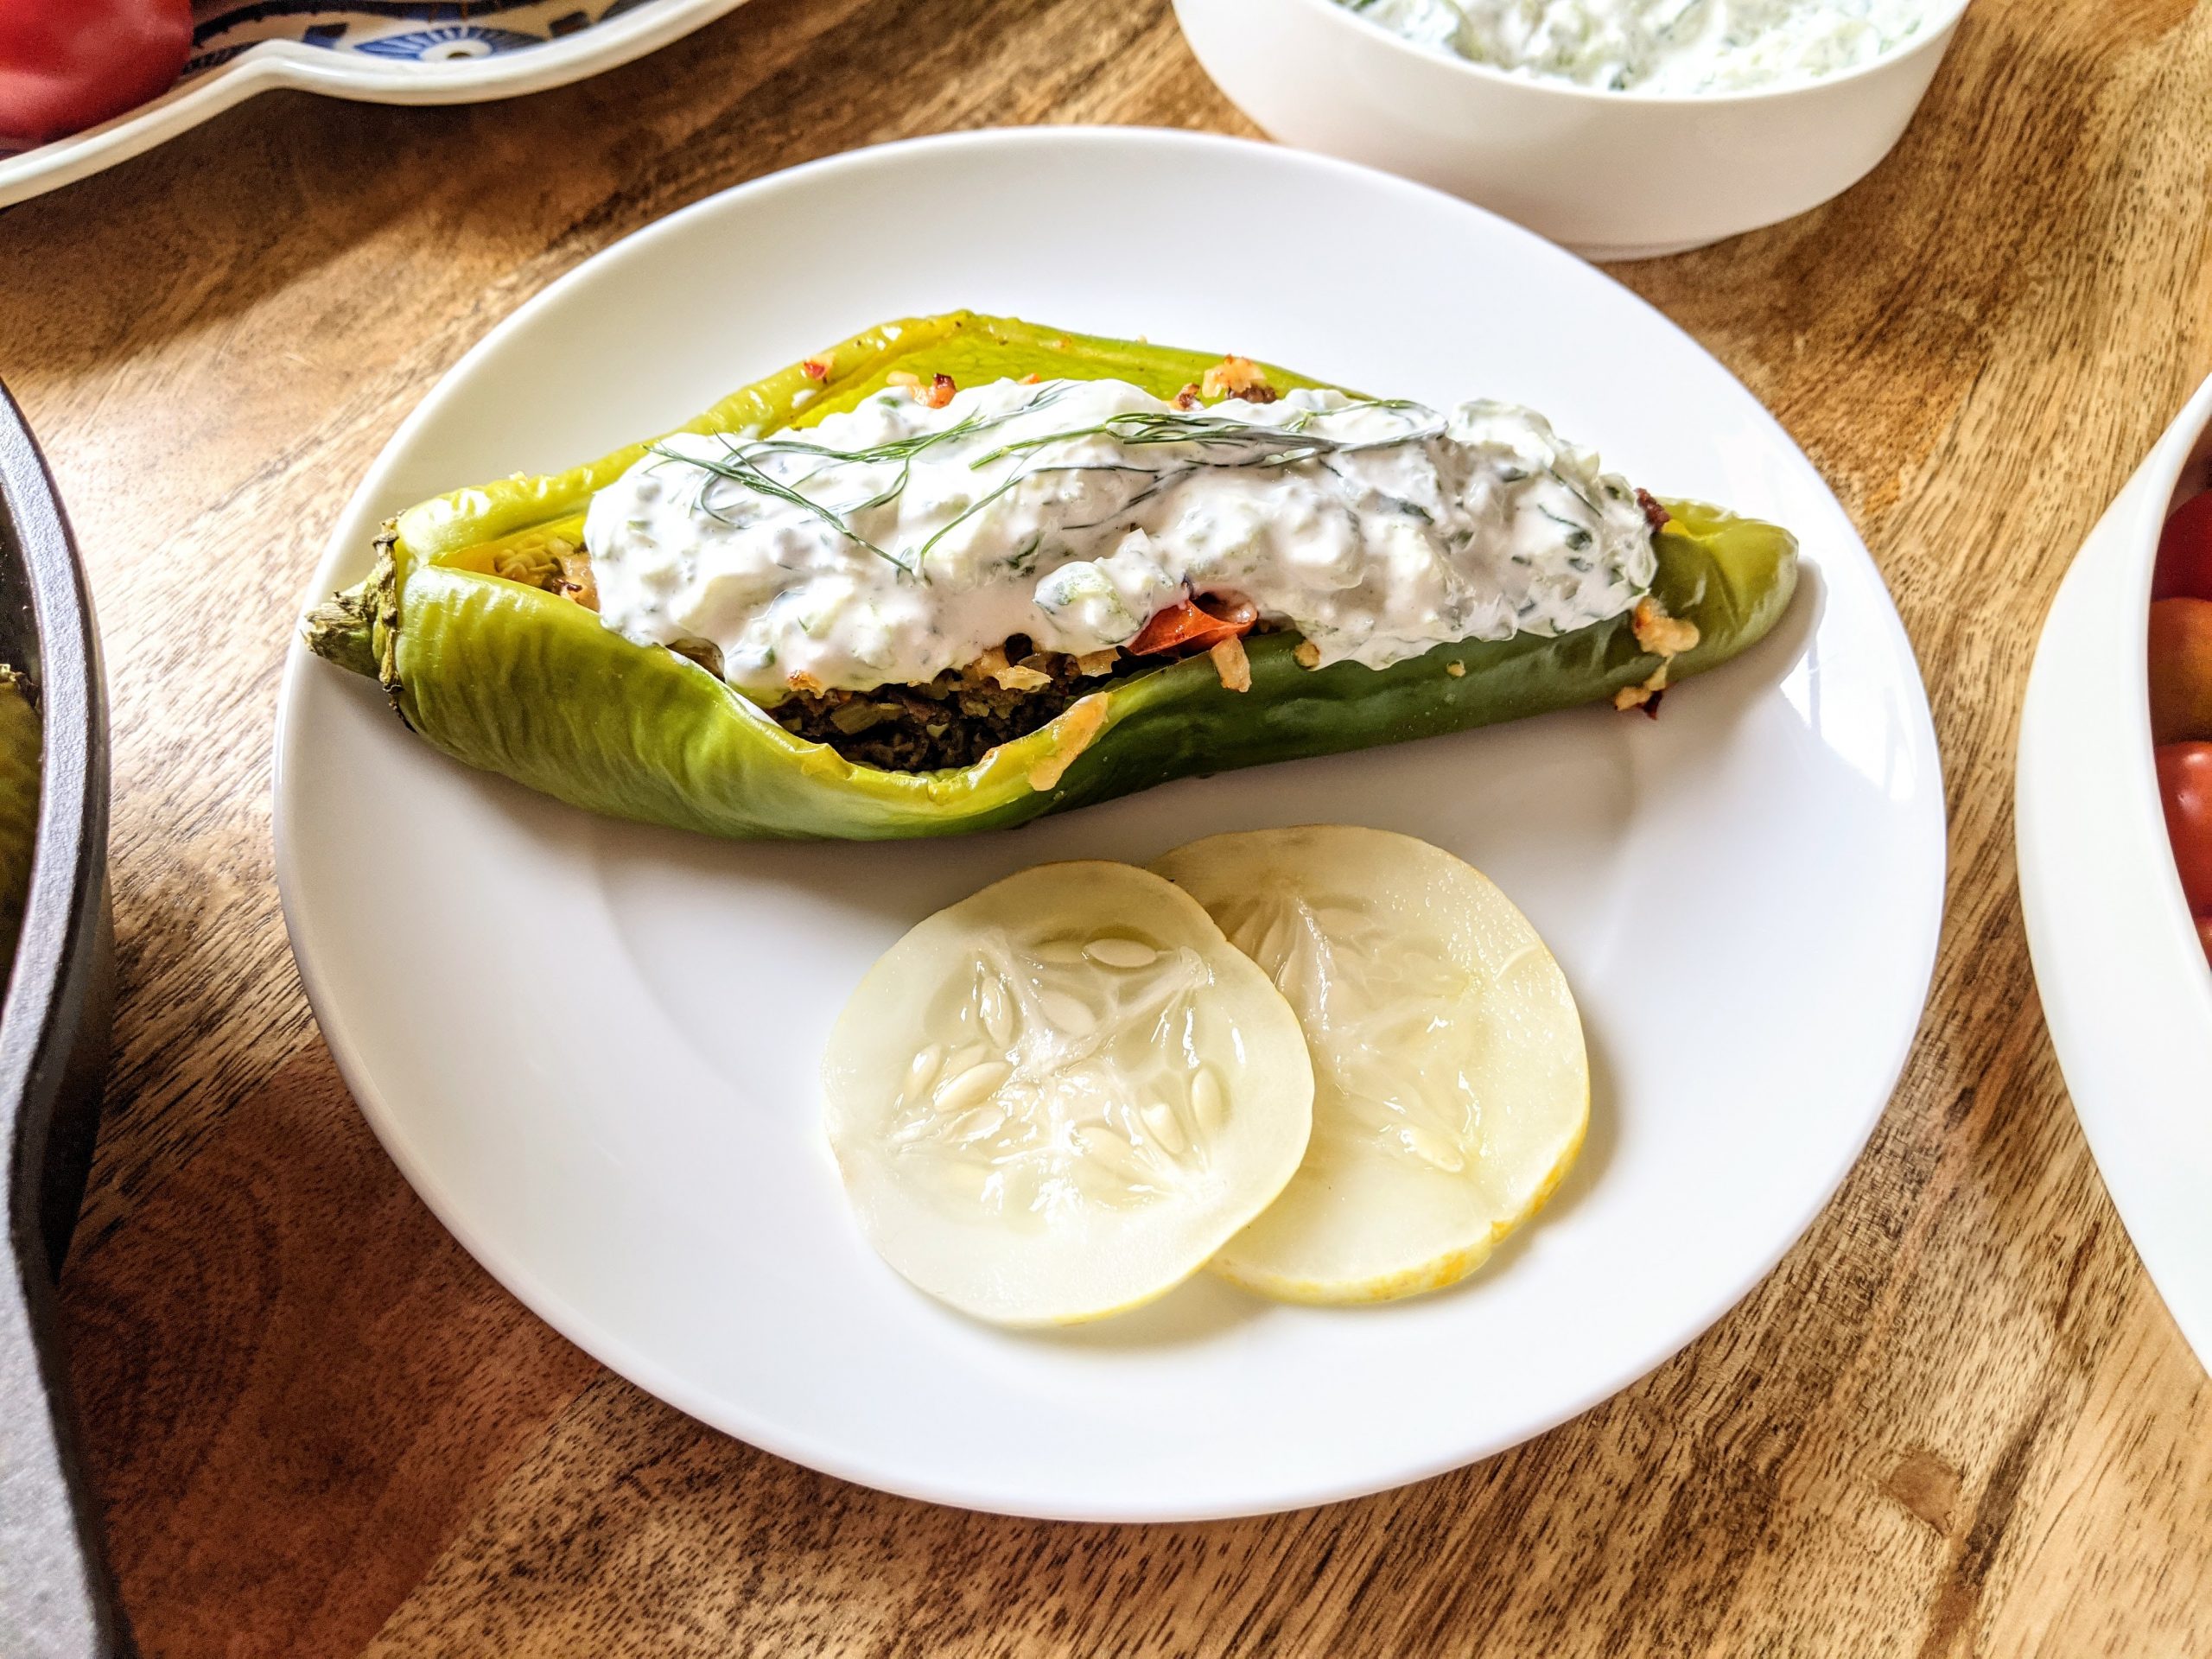 A Georgian inspired stuffed hatch chili pepper, served with yogurt sauce on top and homemade pickled lemon cucumbers.